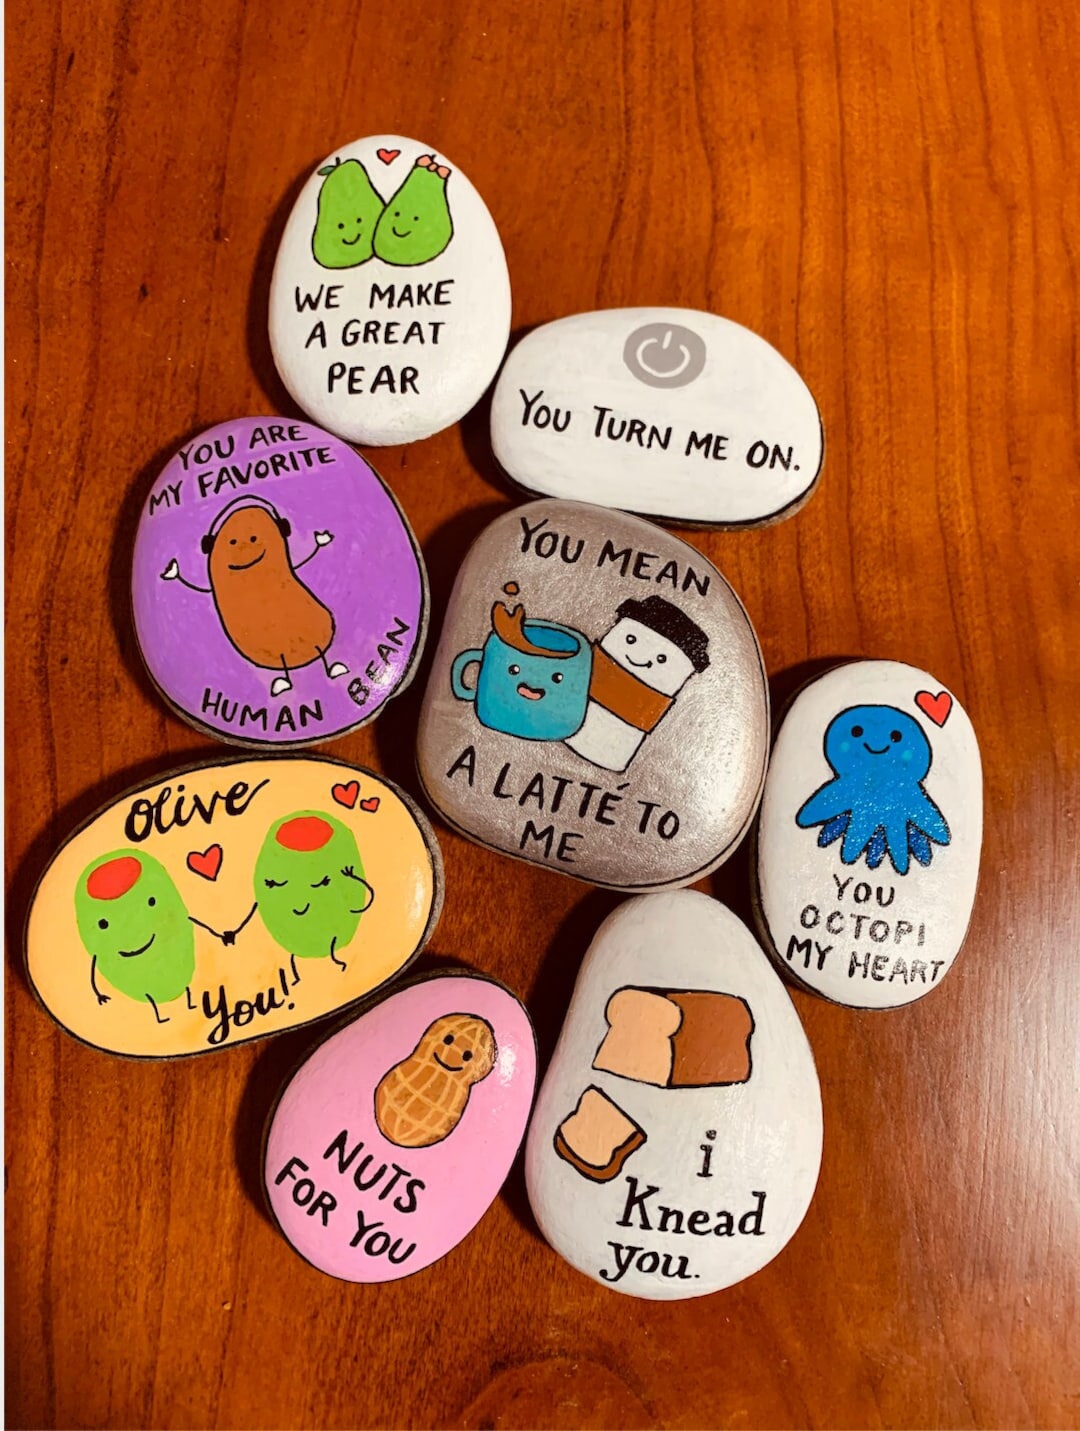 Funny Valentine's Day Gifts or Party Favors, Galentine's Day, Food Puns, I  Love You Jokes, Valentine's Humor Painted Stones/rocks - Etsy